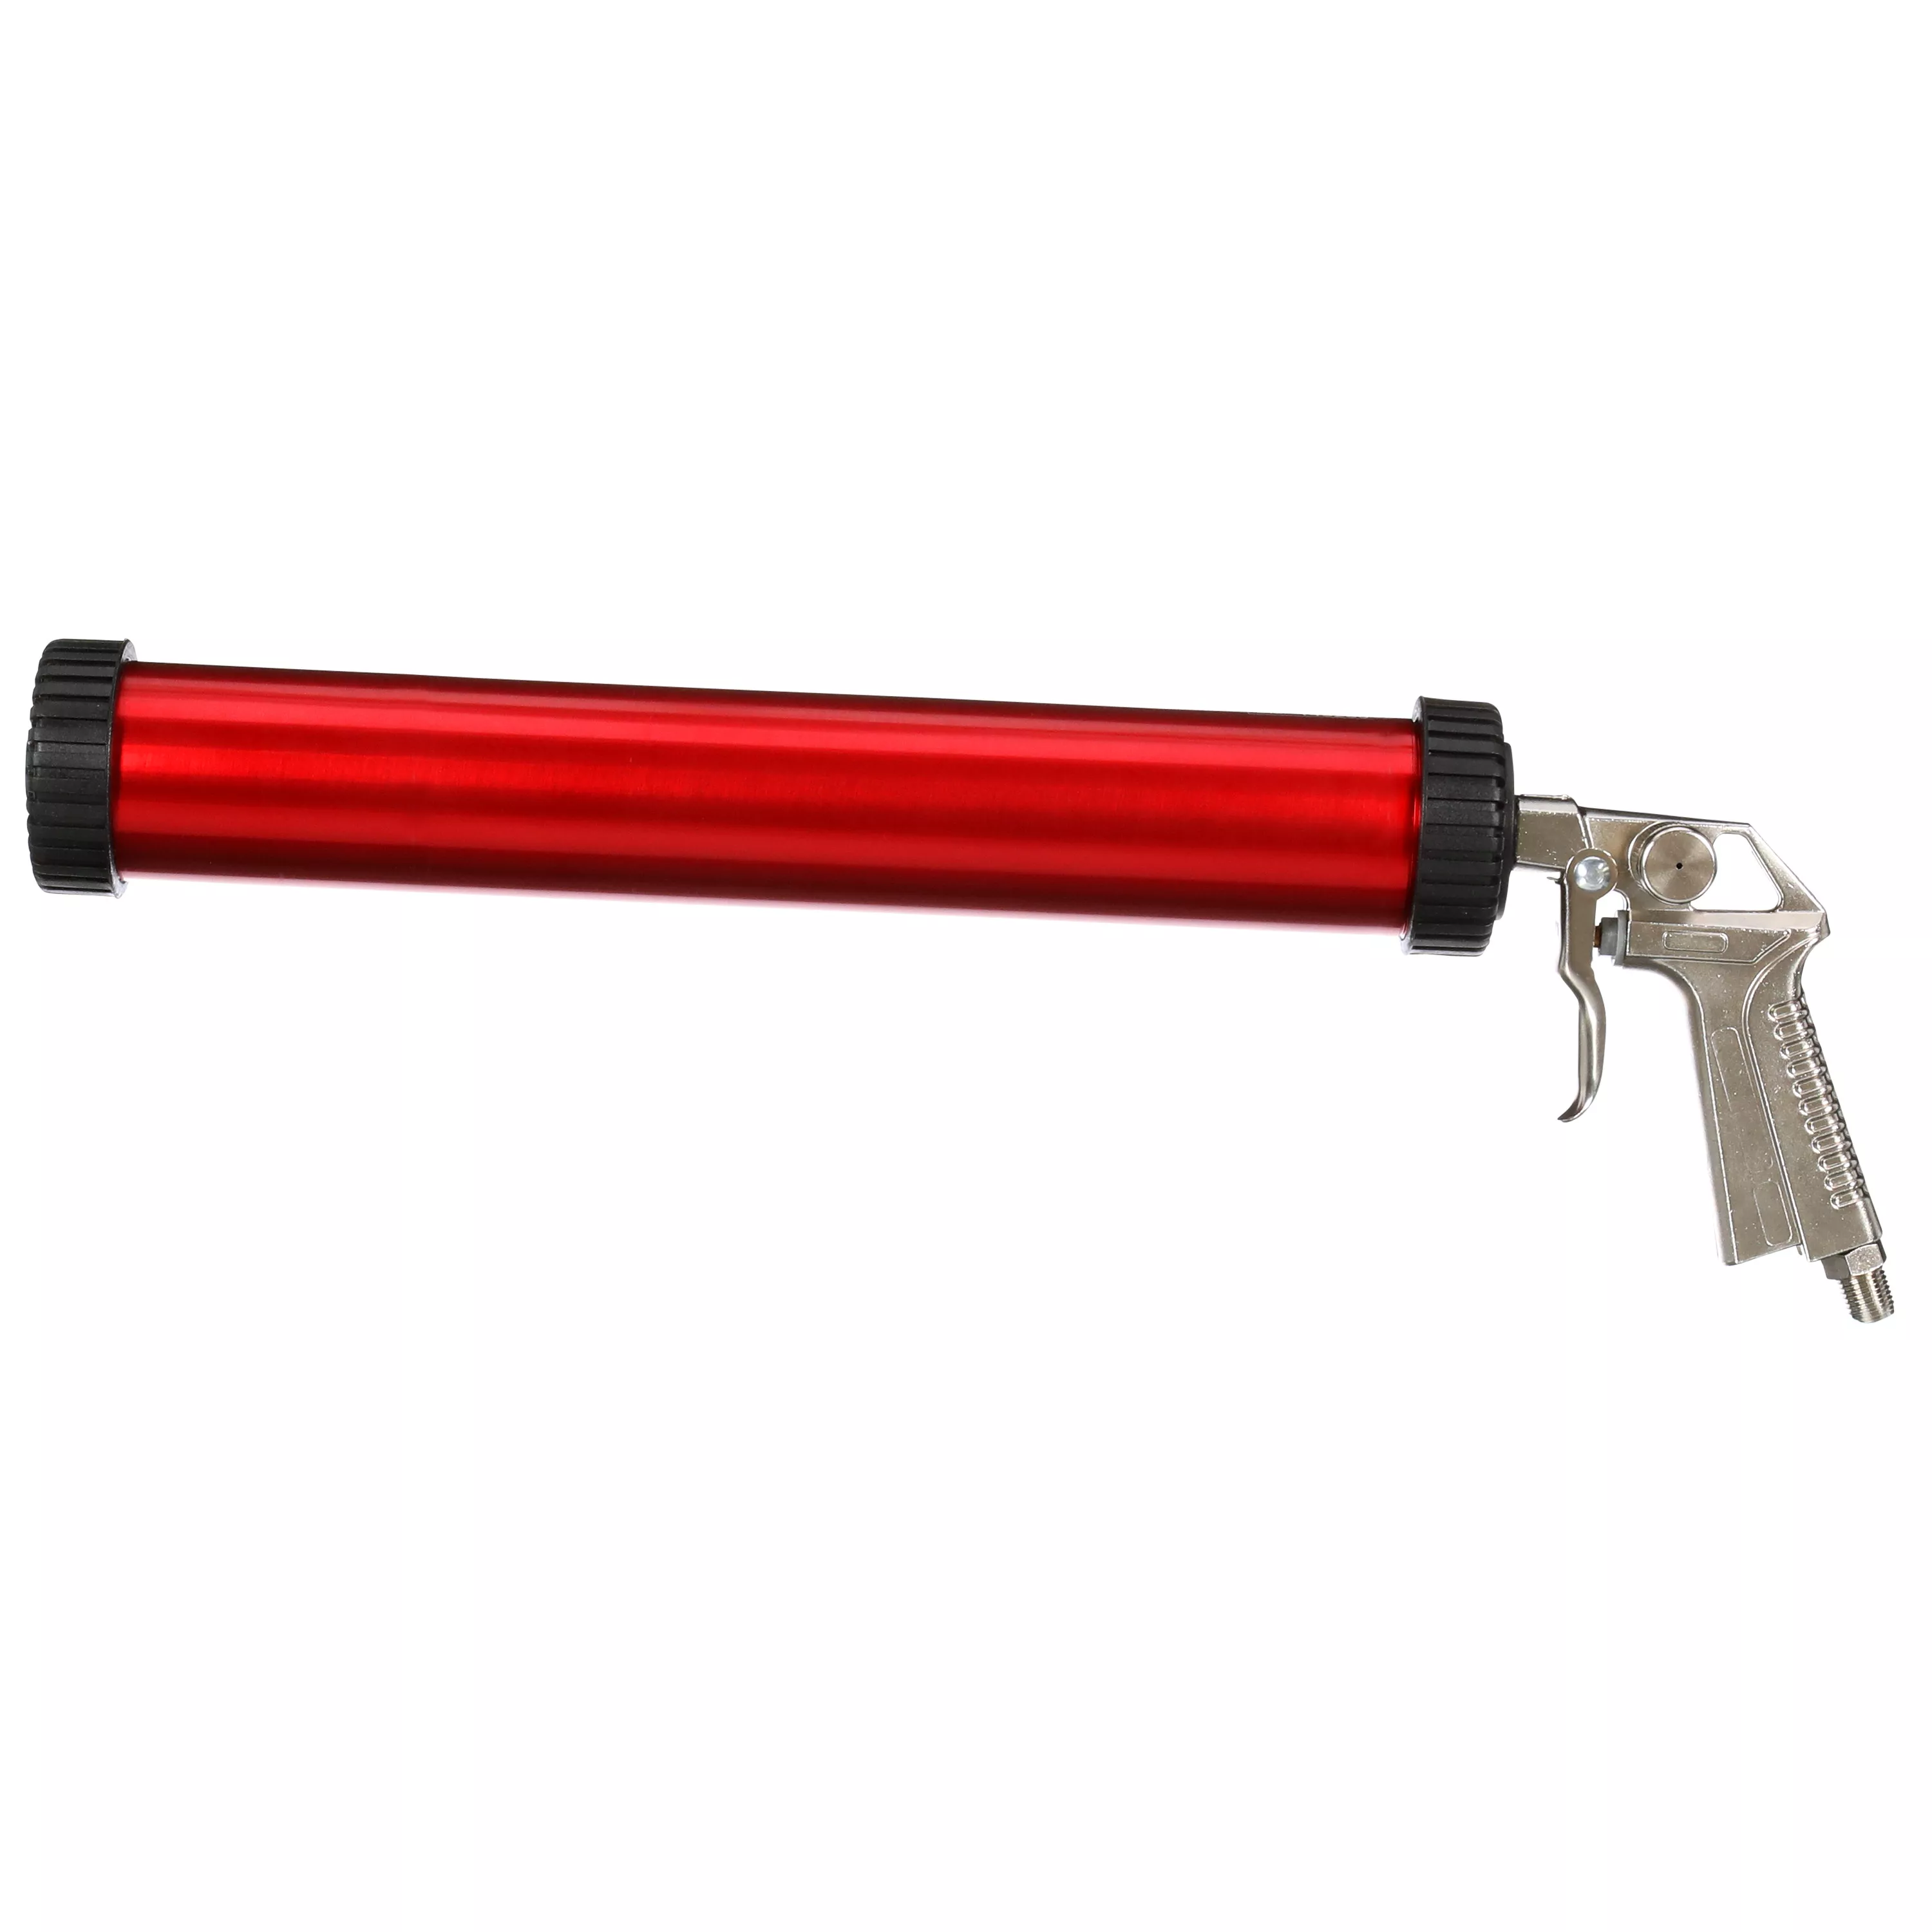 3M™ Pneumatic Applicator 34A, for 310 mL Cartridges or 400 mL Sausage
Packs, 1/Case